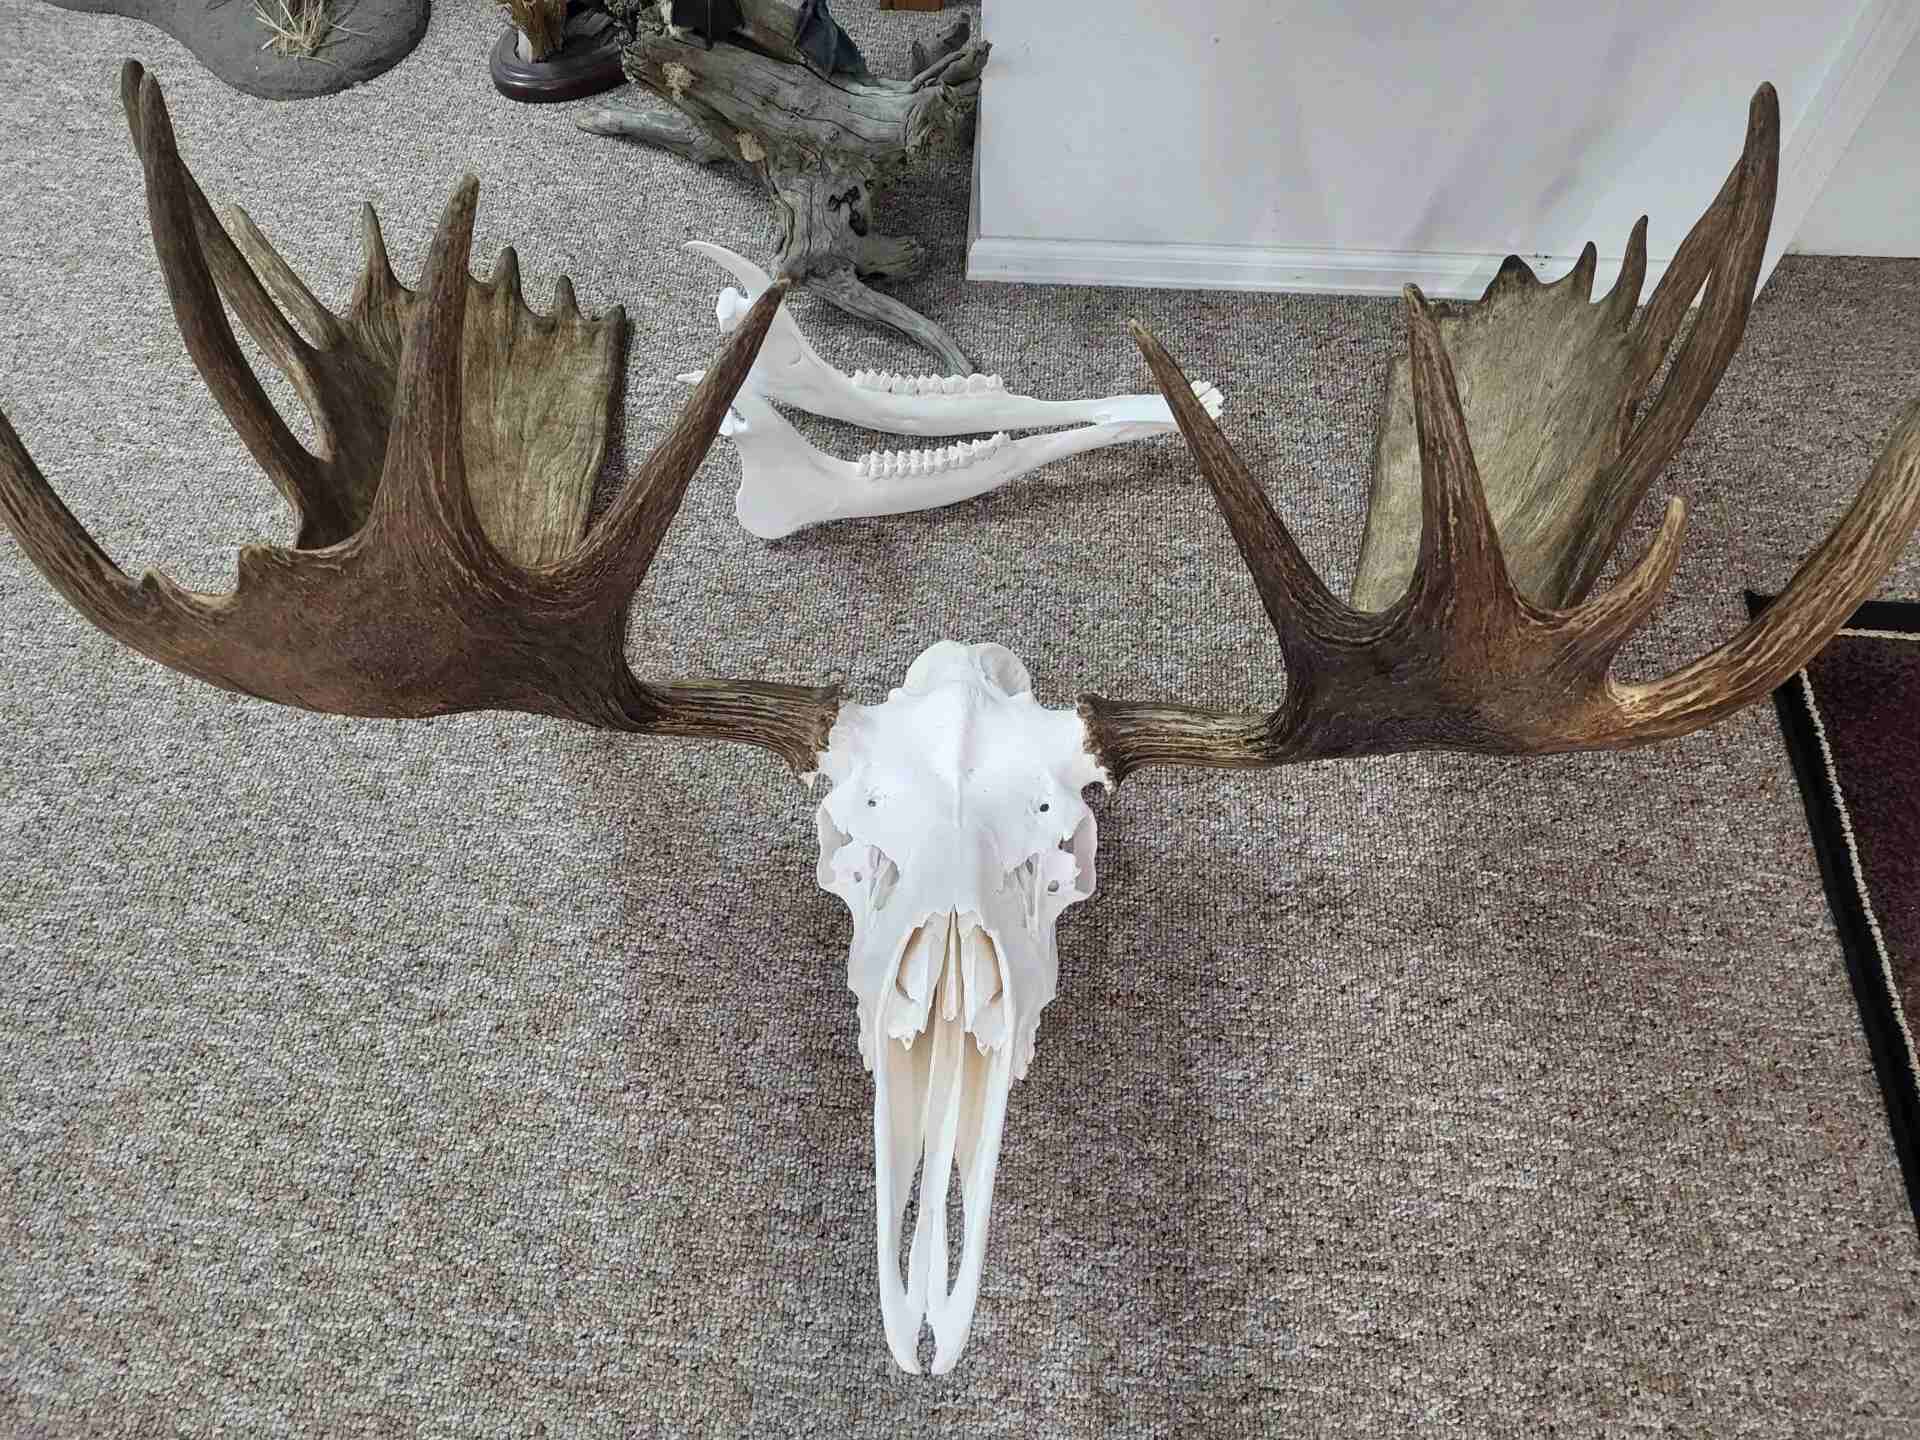 Eagle skull and wings on the floor mat